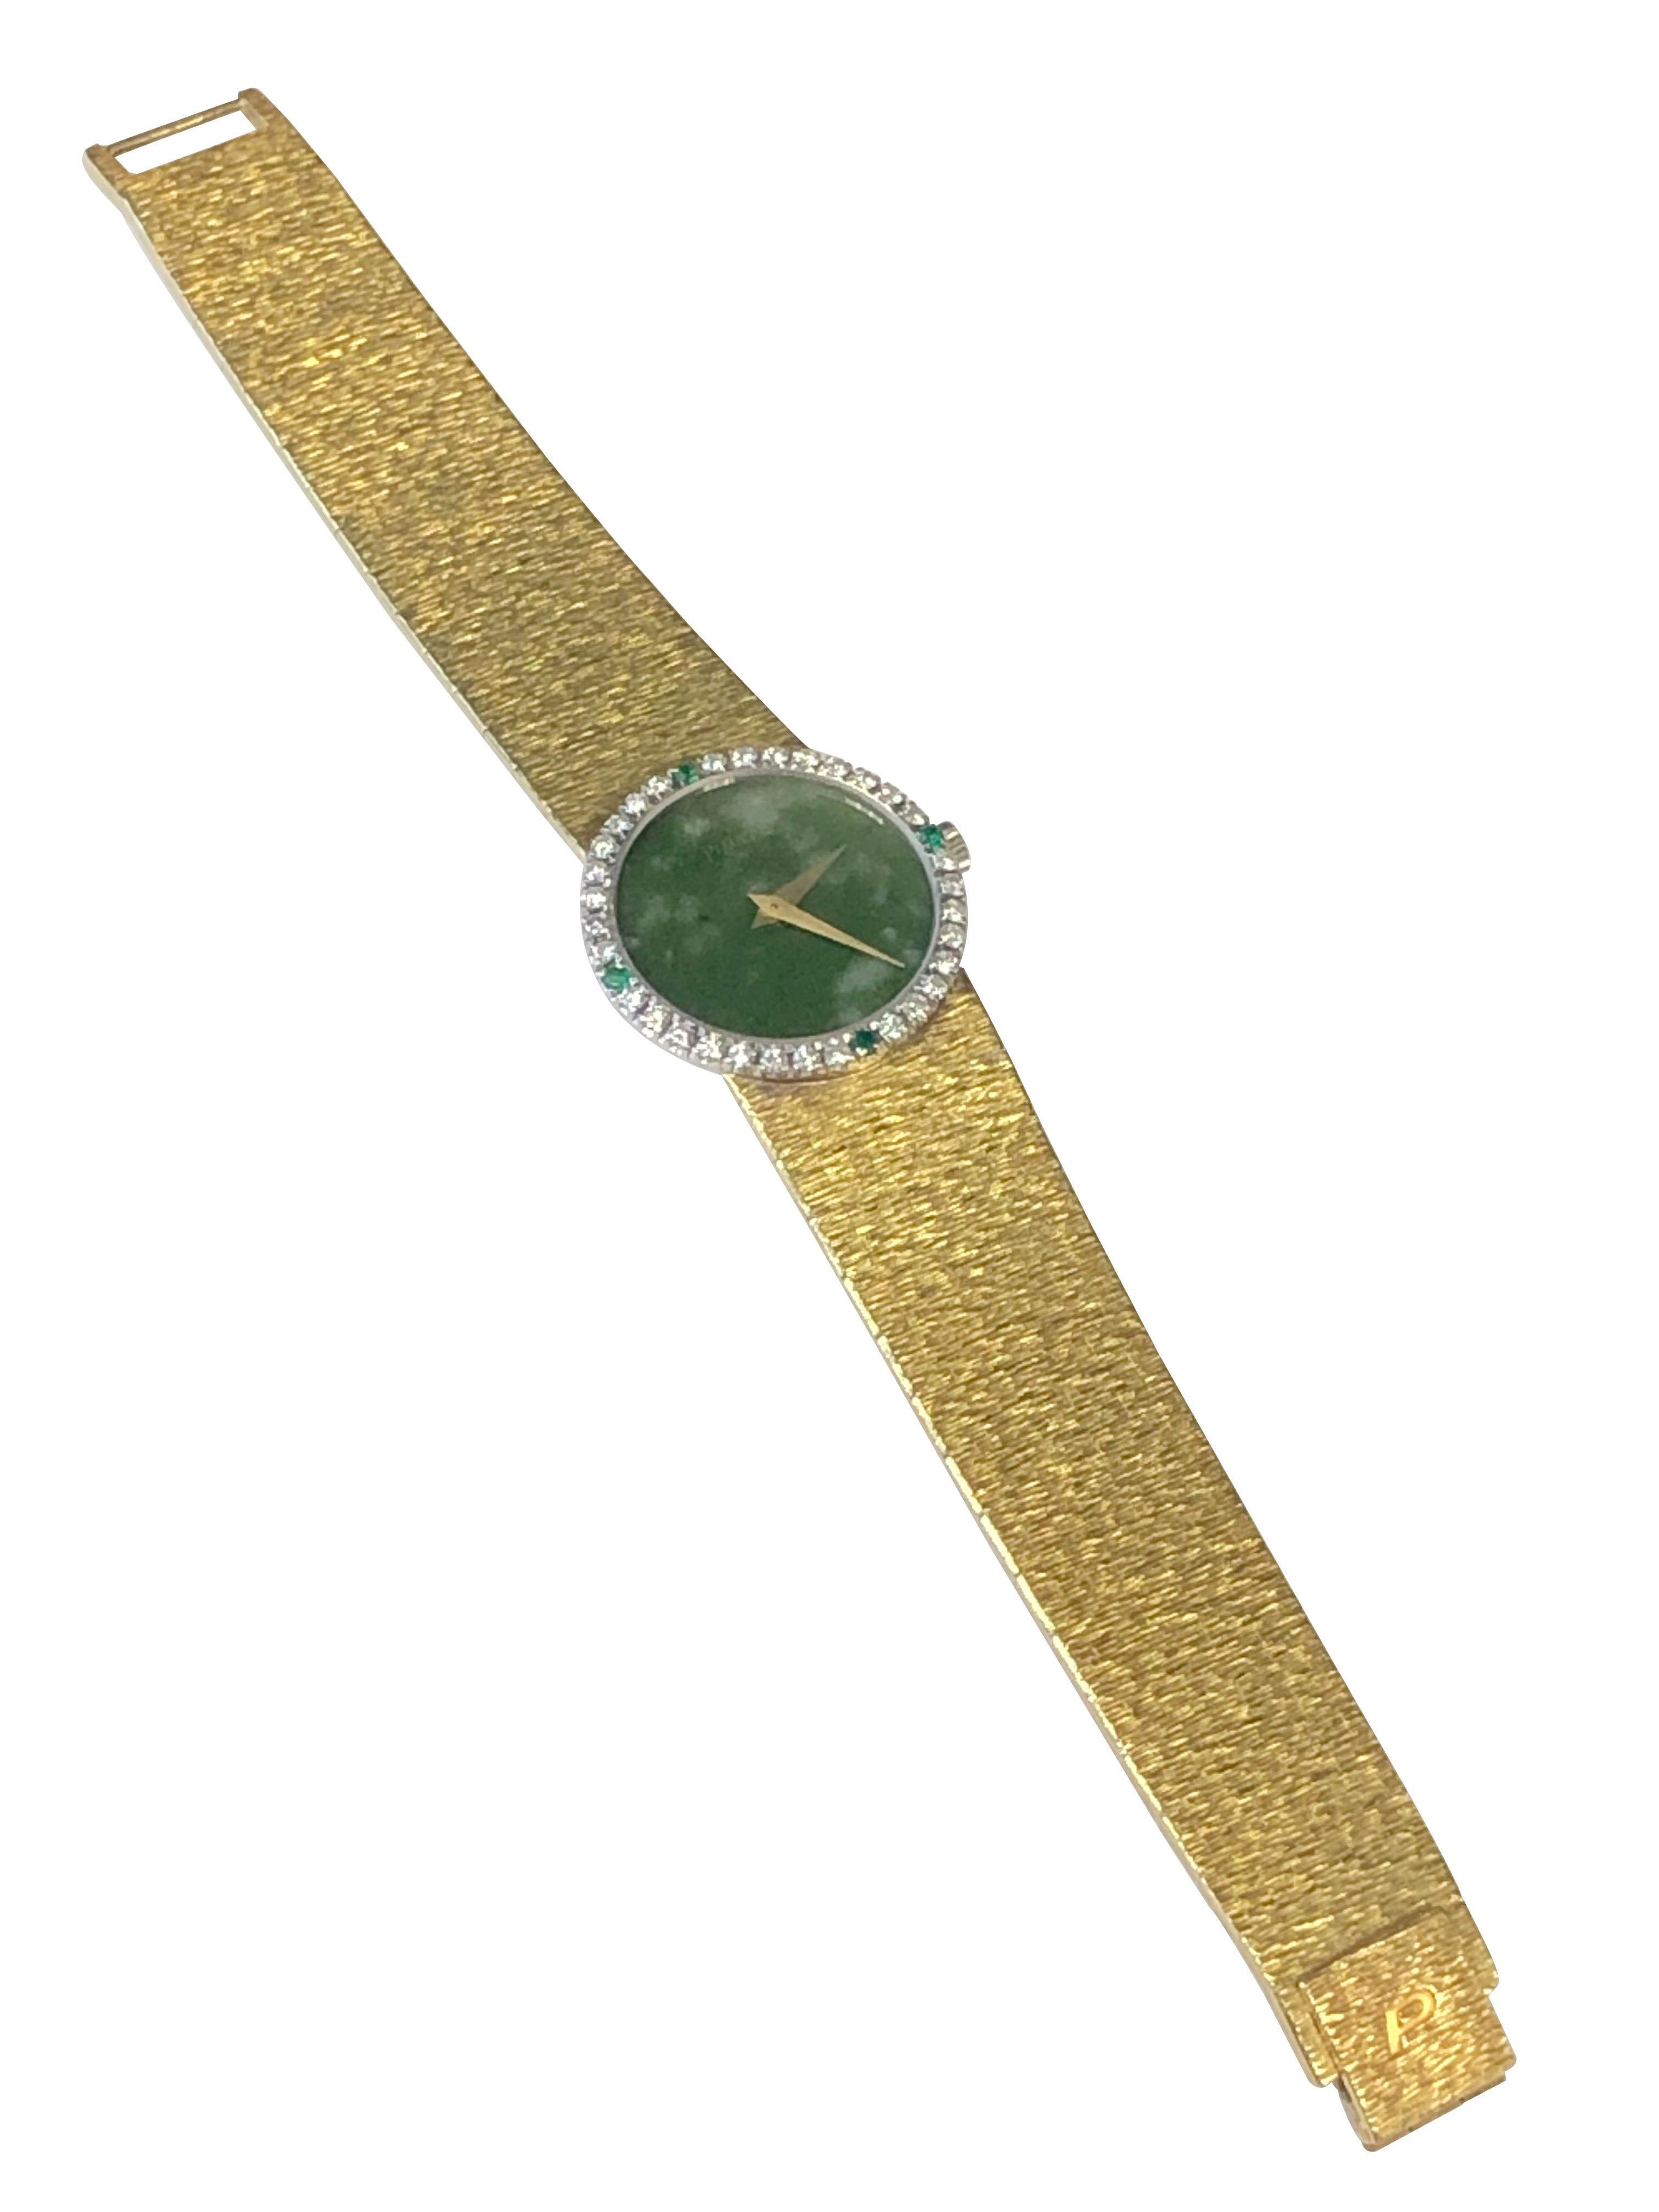 Piaget Gold Diamond Emerald and Jadite Dial Ladies Mechanical Wrist Watch In Excellent Condition For Sale In Chicago, IL